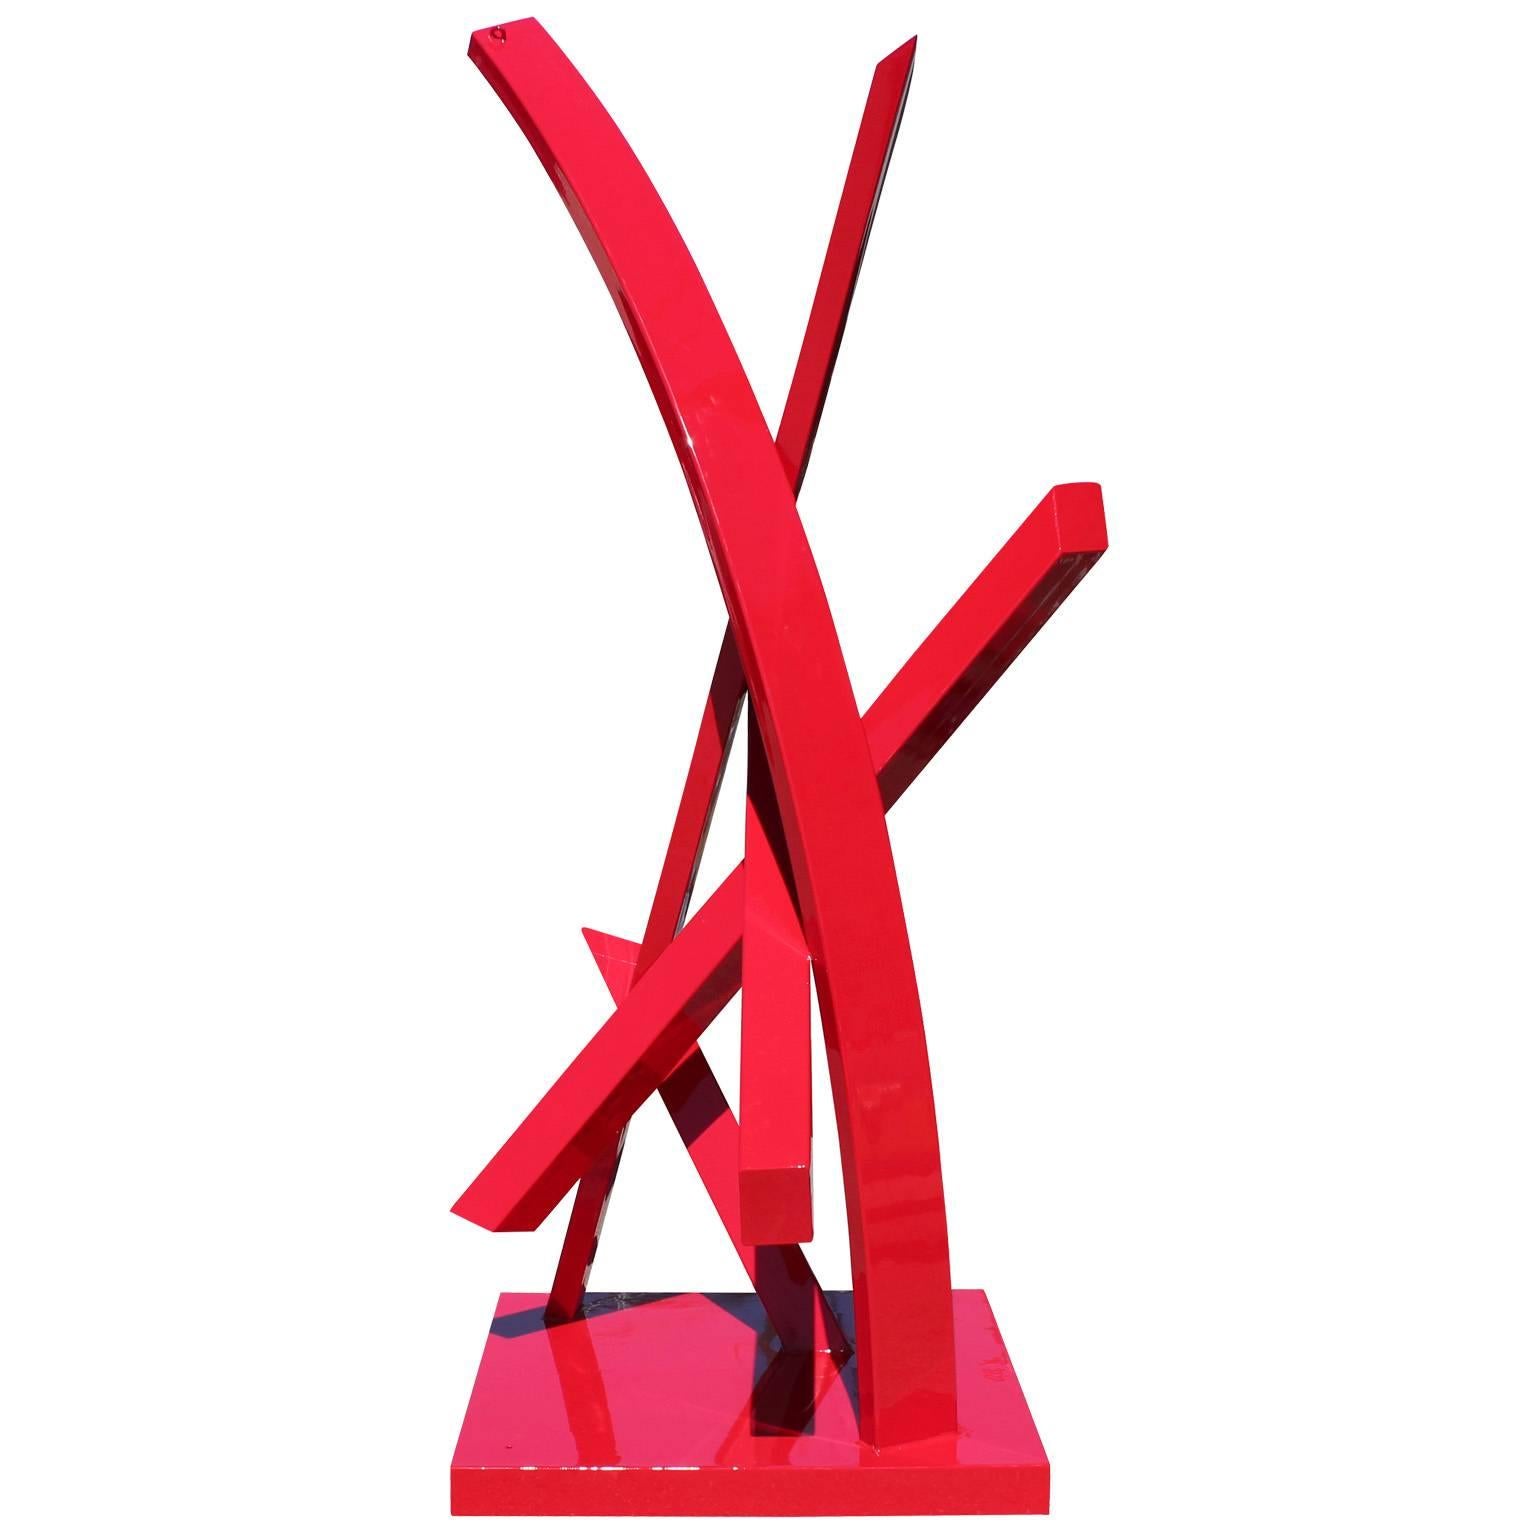 Huge 8ft tall red powder coated steel abstract sculpture. The sculpture is stunning in person and adds visual interest from all angles. The piece has been industrially powder coated and should last many many years in all weather types. Could also be